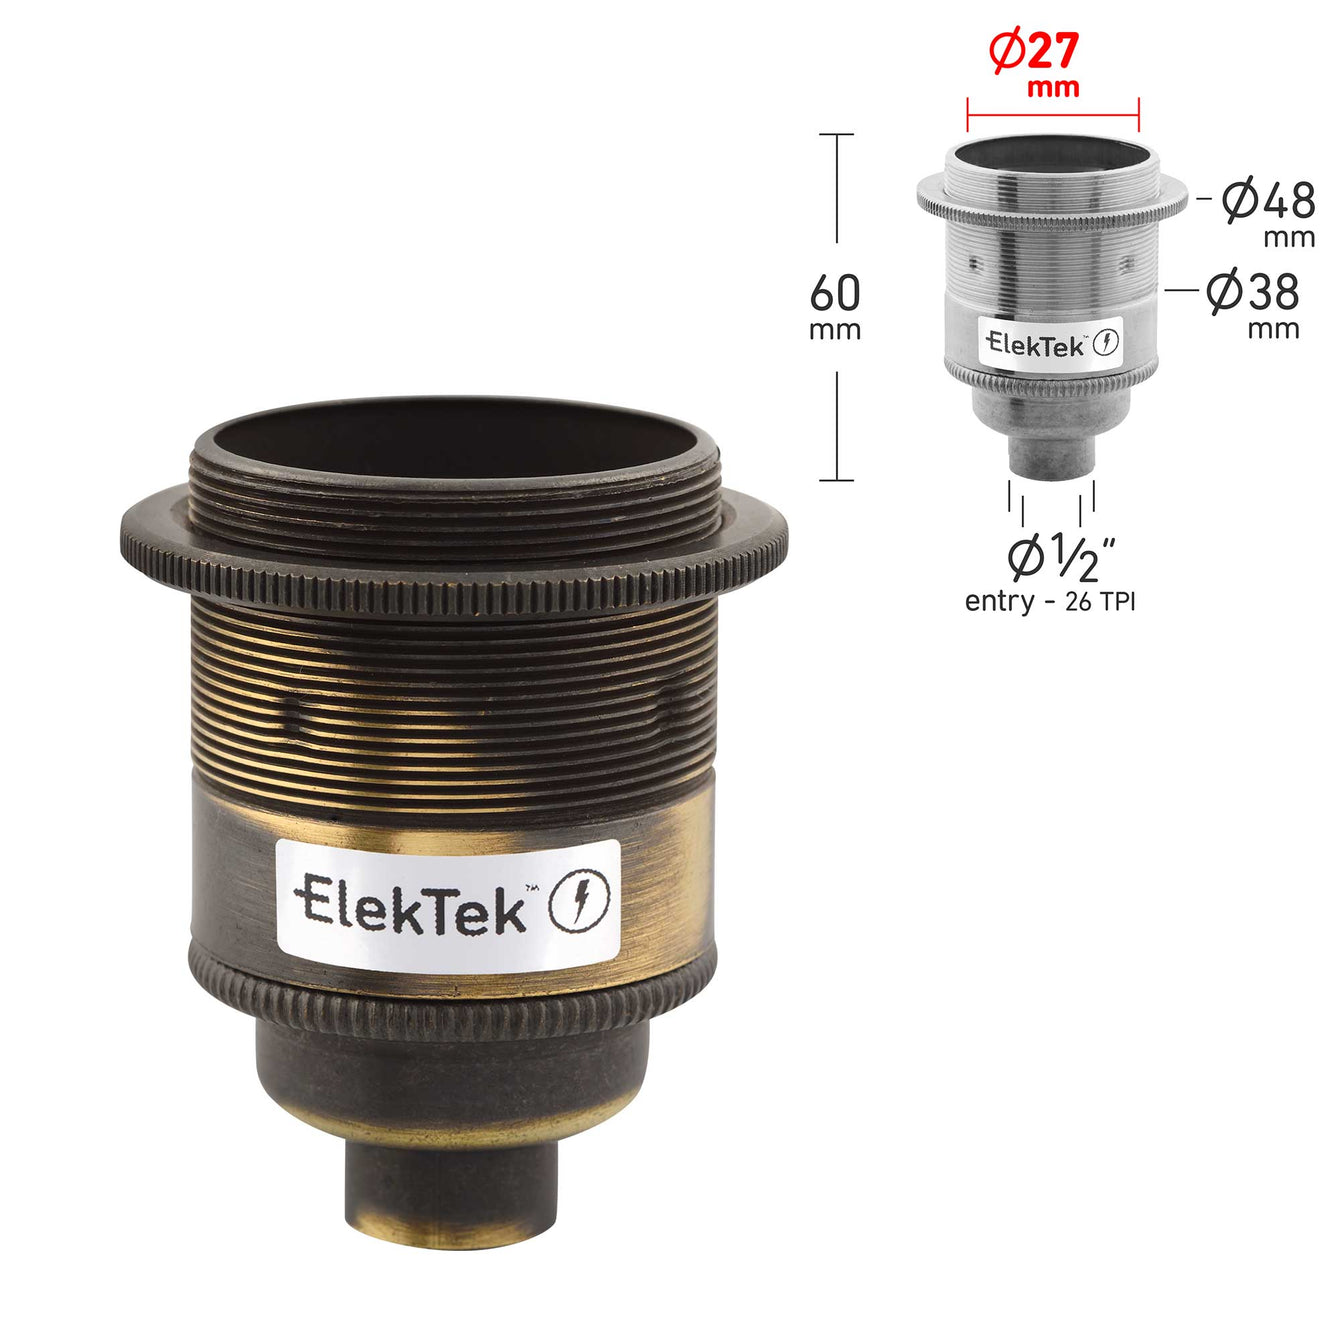 ElekTek ES Edison Screw E27 Lamp Holder With Shade Ring 10mm or Half Inch Entry Ideal for Vintage Filament Bulbs Brass - Buy It Better 